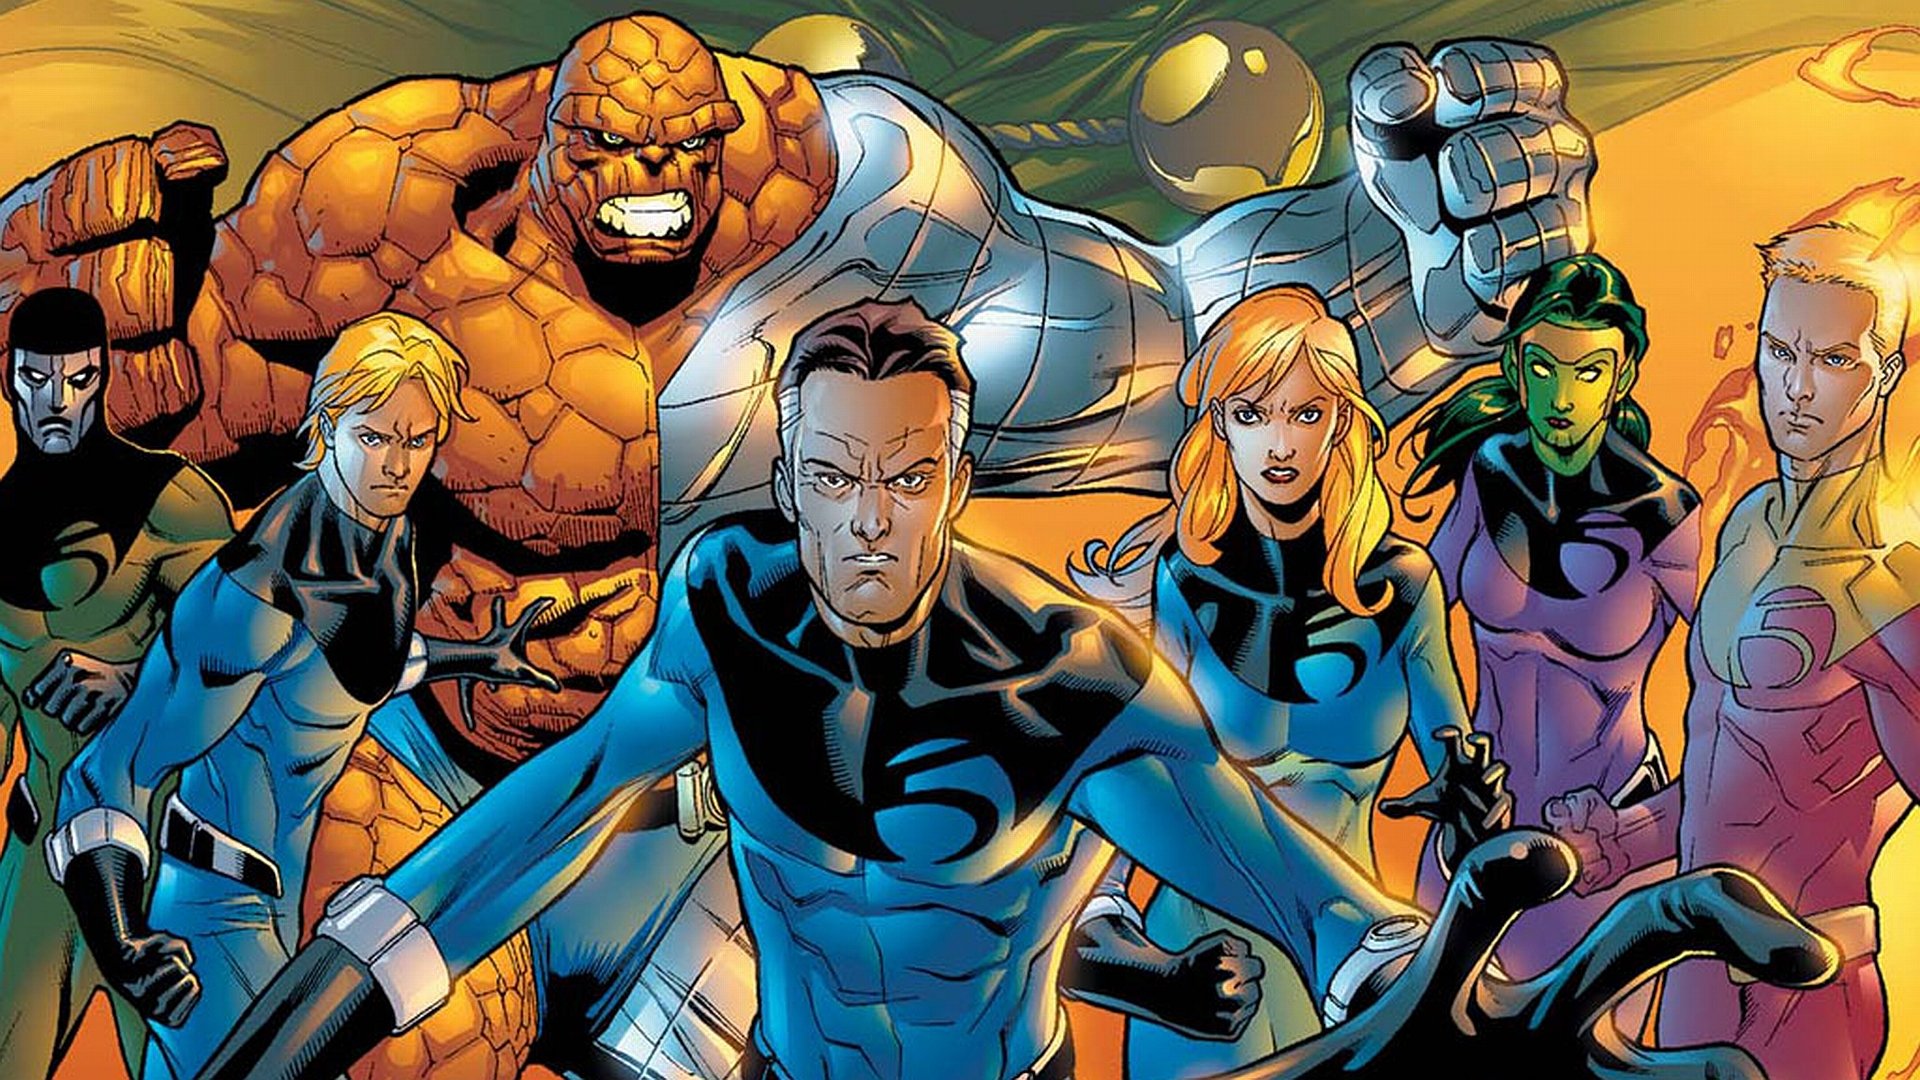 Fantastic Four Full HD Wallpaper and Background Image | 1920x1080 | ID